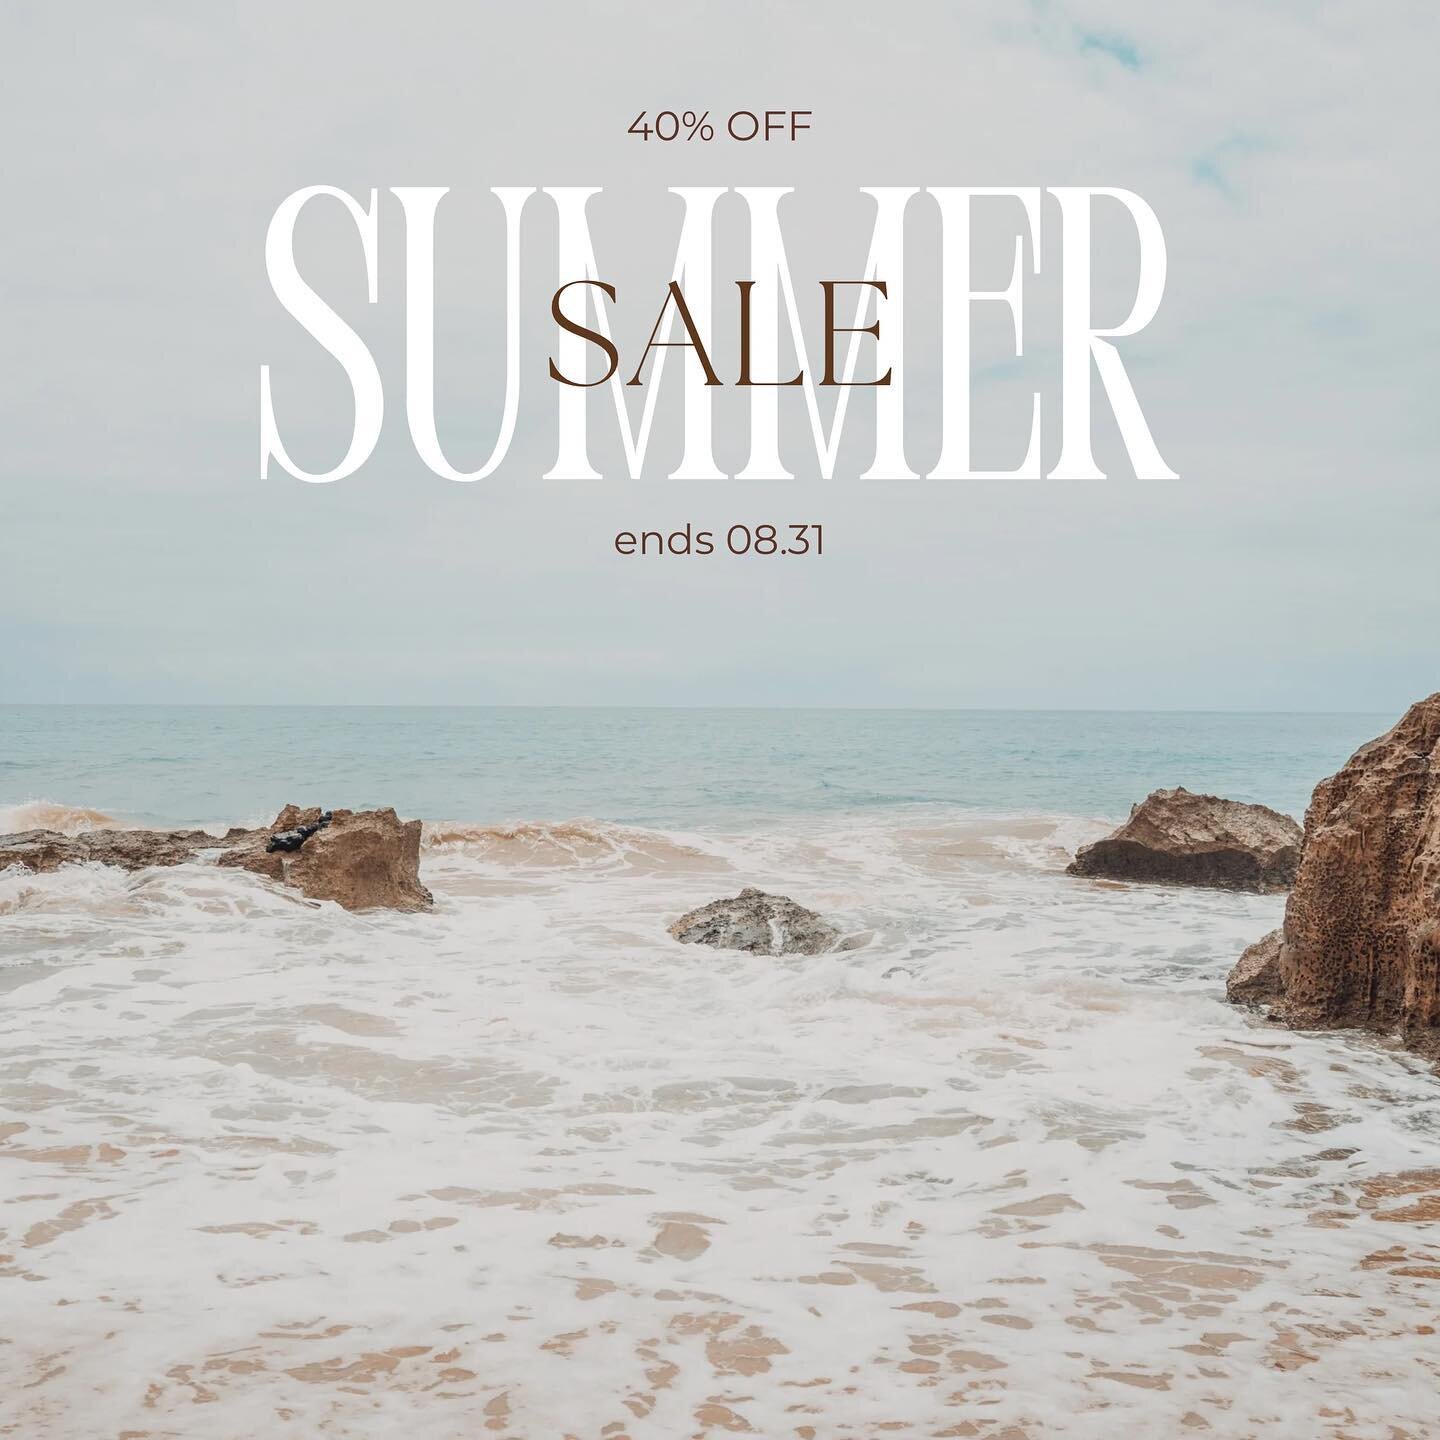 The season is coming to an end which is the perfect time to start your laser hair removal journey! 🍂

Until the end of the month we are offering our summer sale promo extending 40% off ANY laser package of your choice! 💸

If you don&rsquo;t have th